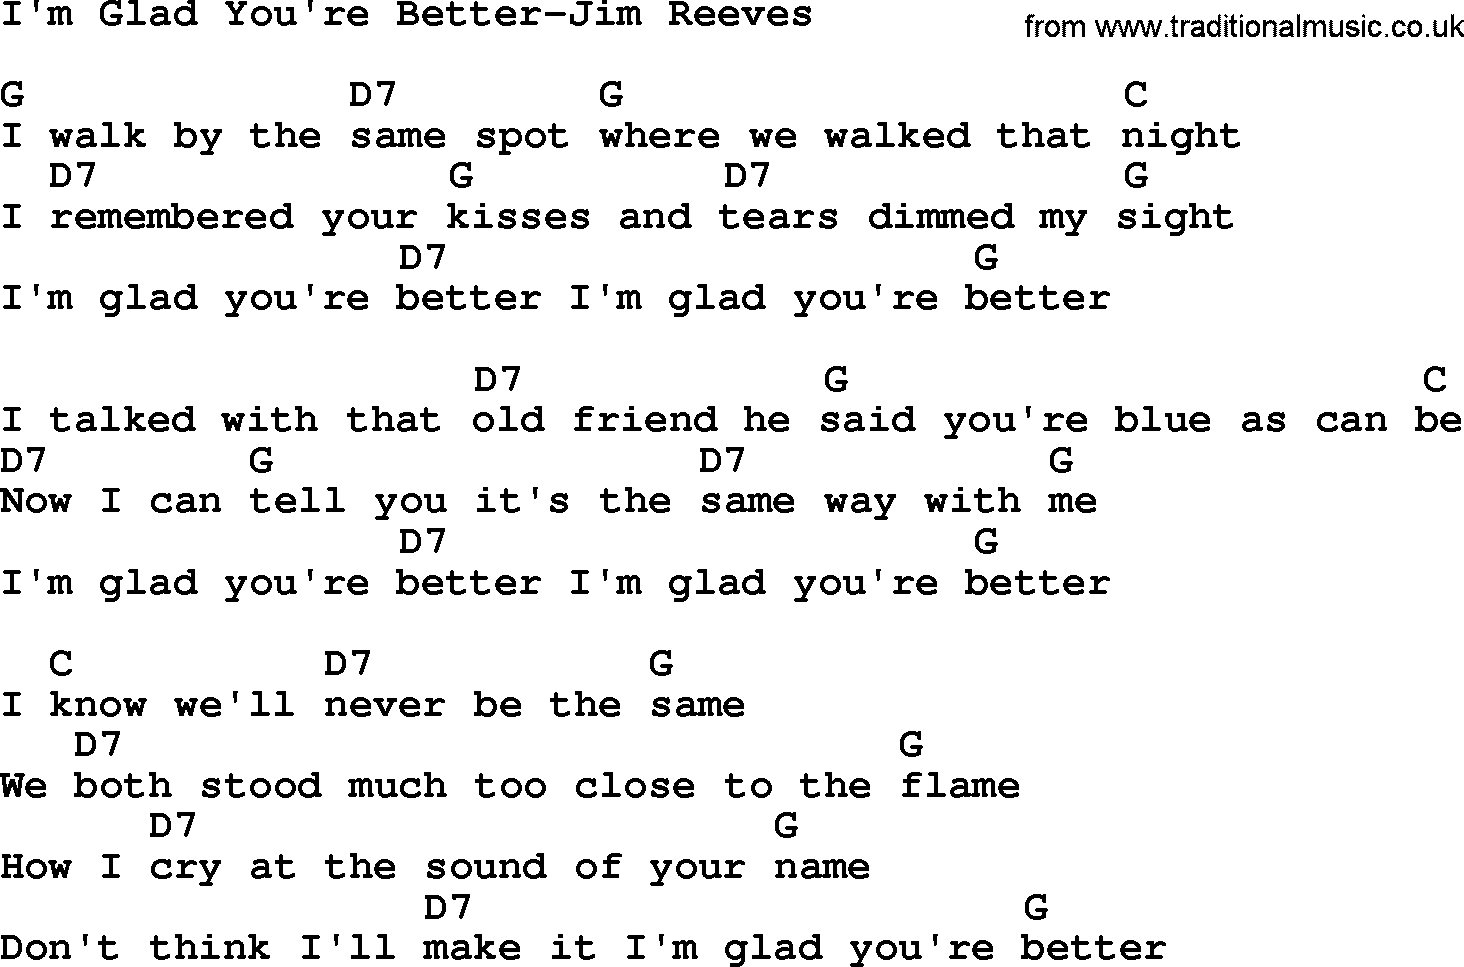 Country music song: I'm Glad You're Better-Jim Reeves lyrics and chords